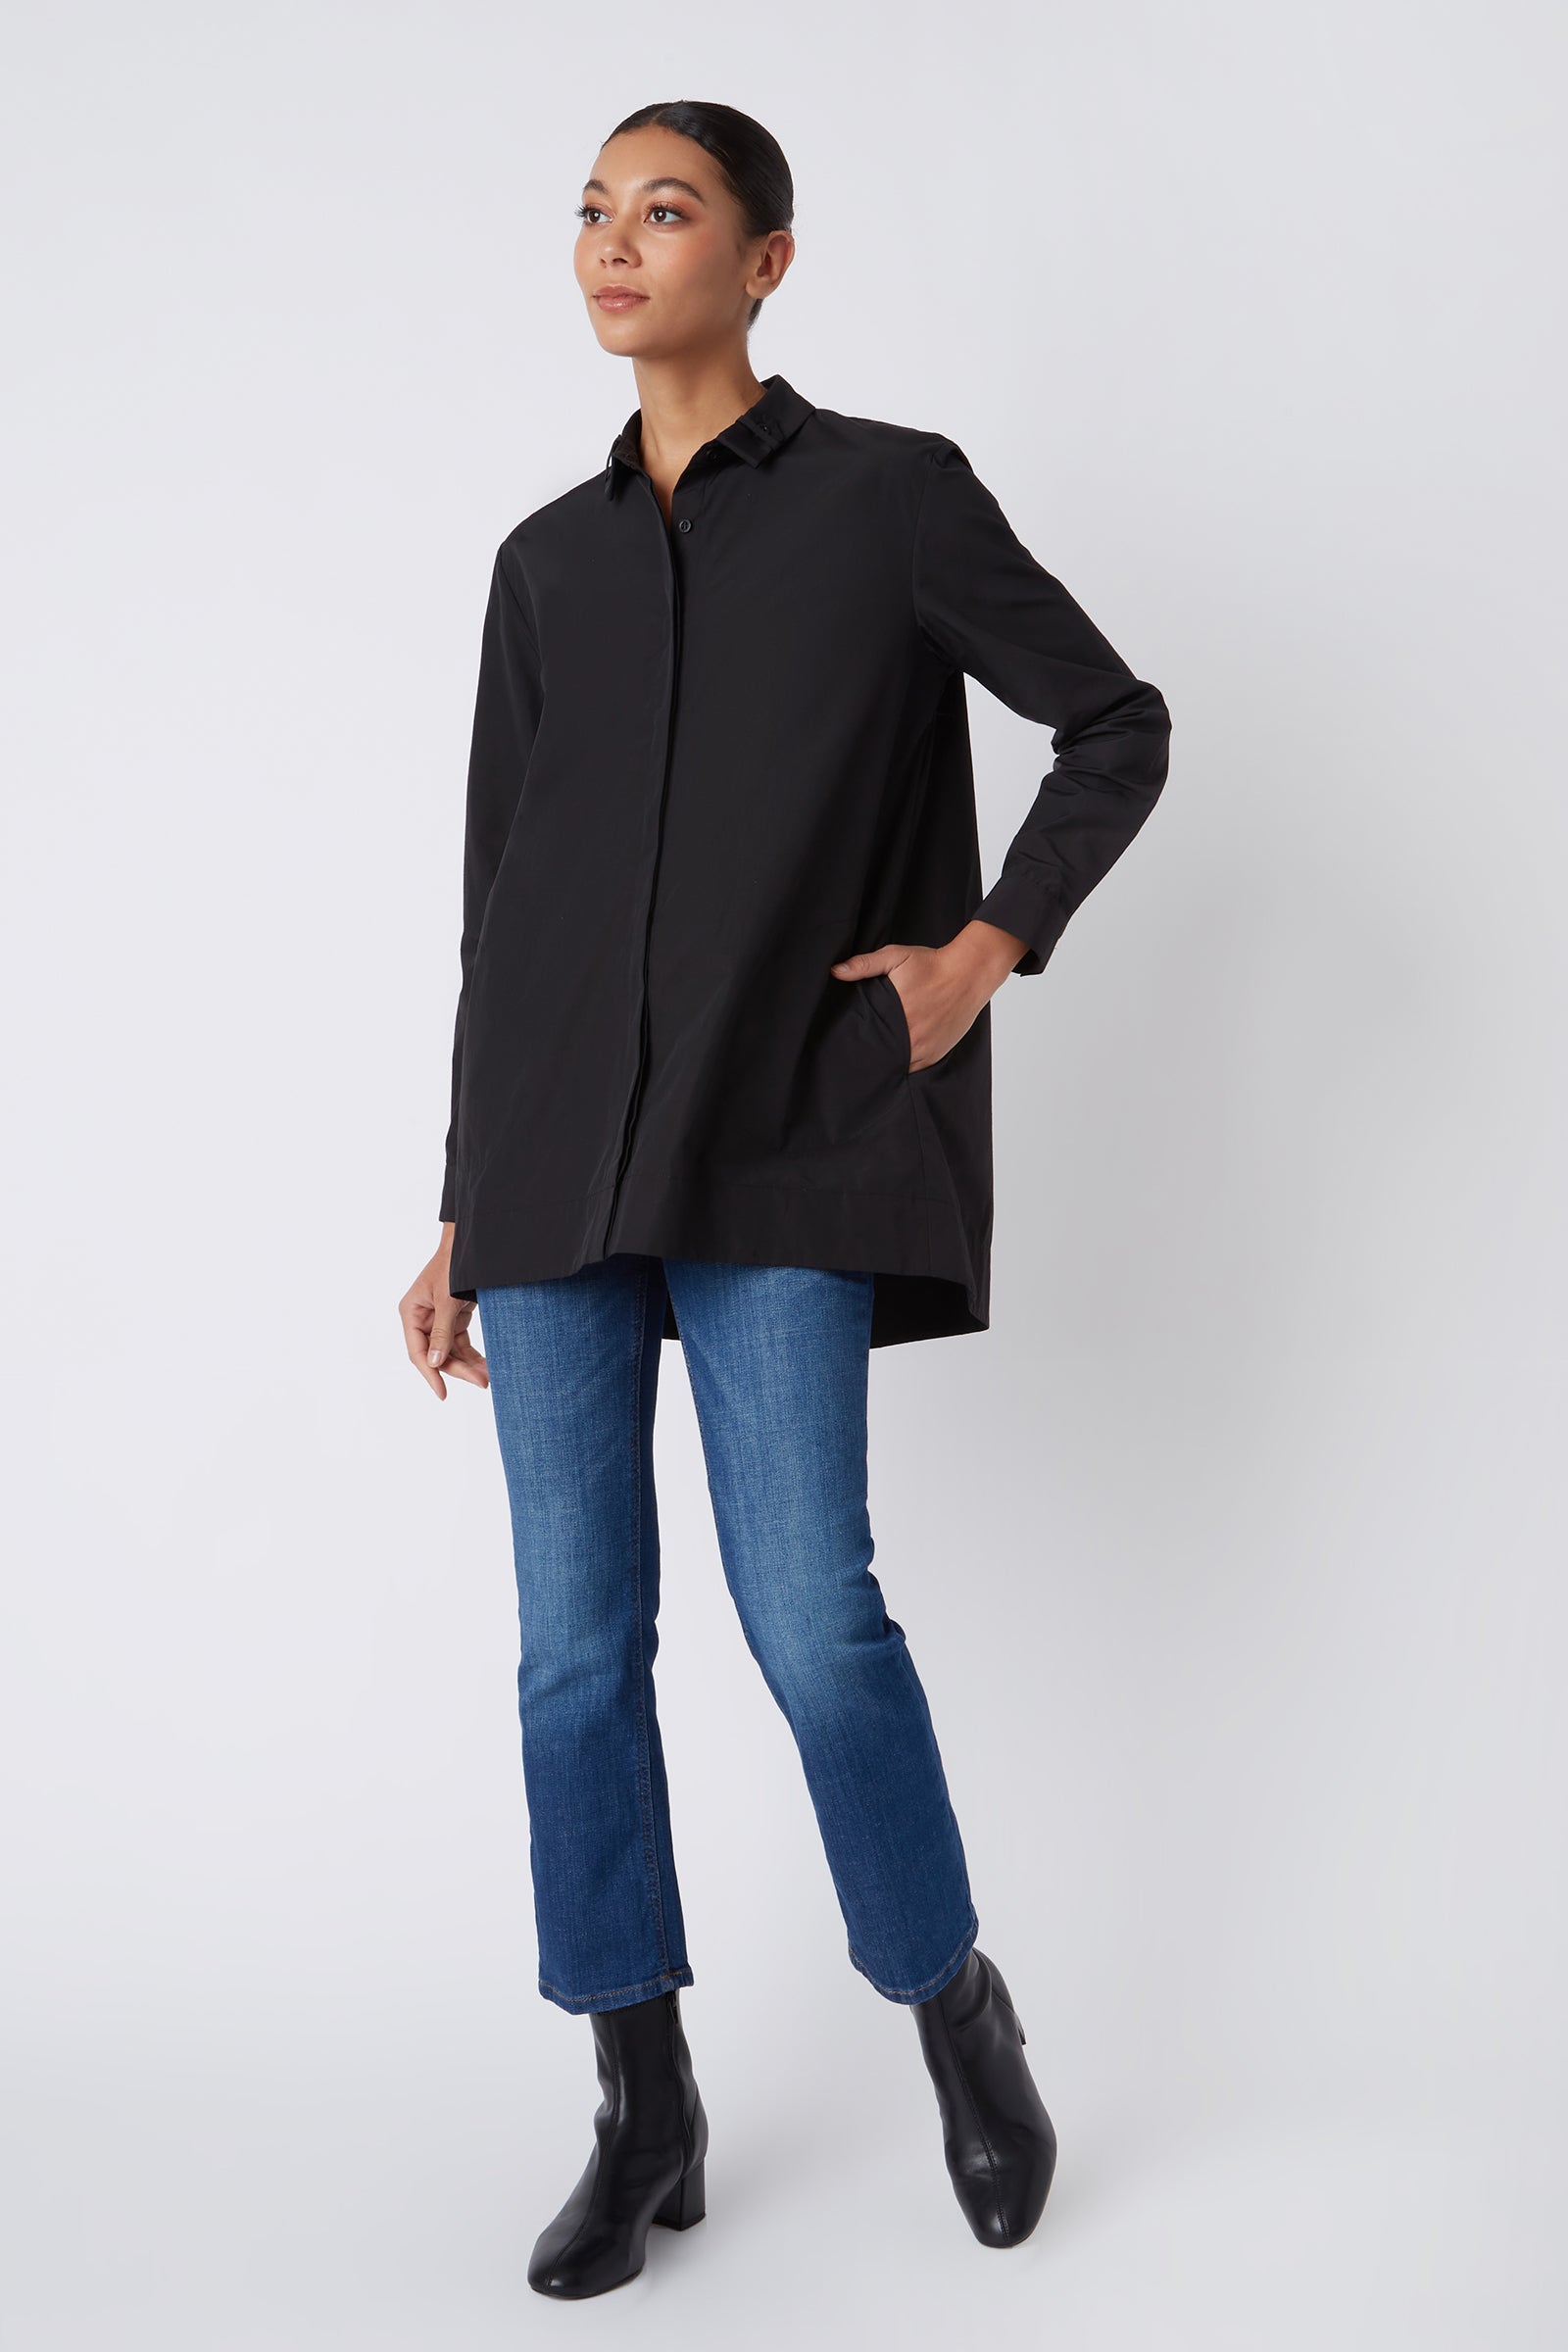 Kal Rieman Lori Tab Collar Tunic in Black on Model with Hand in Pocket Walking Full Front View